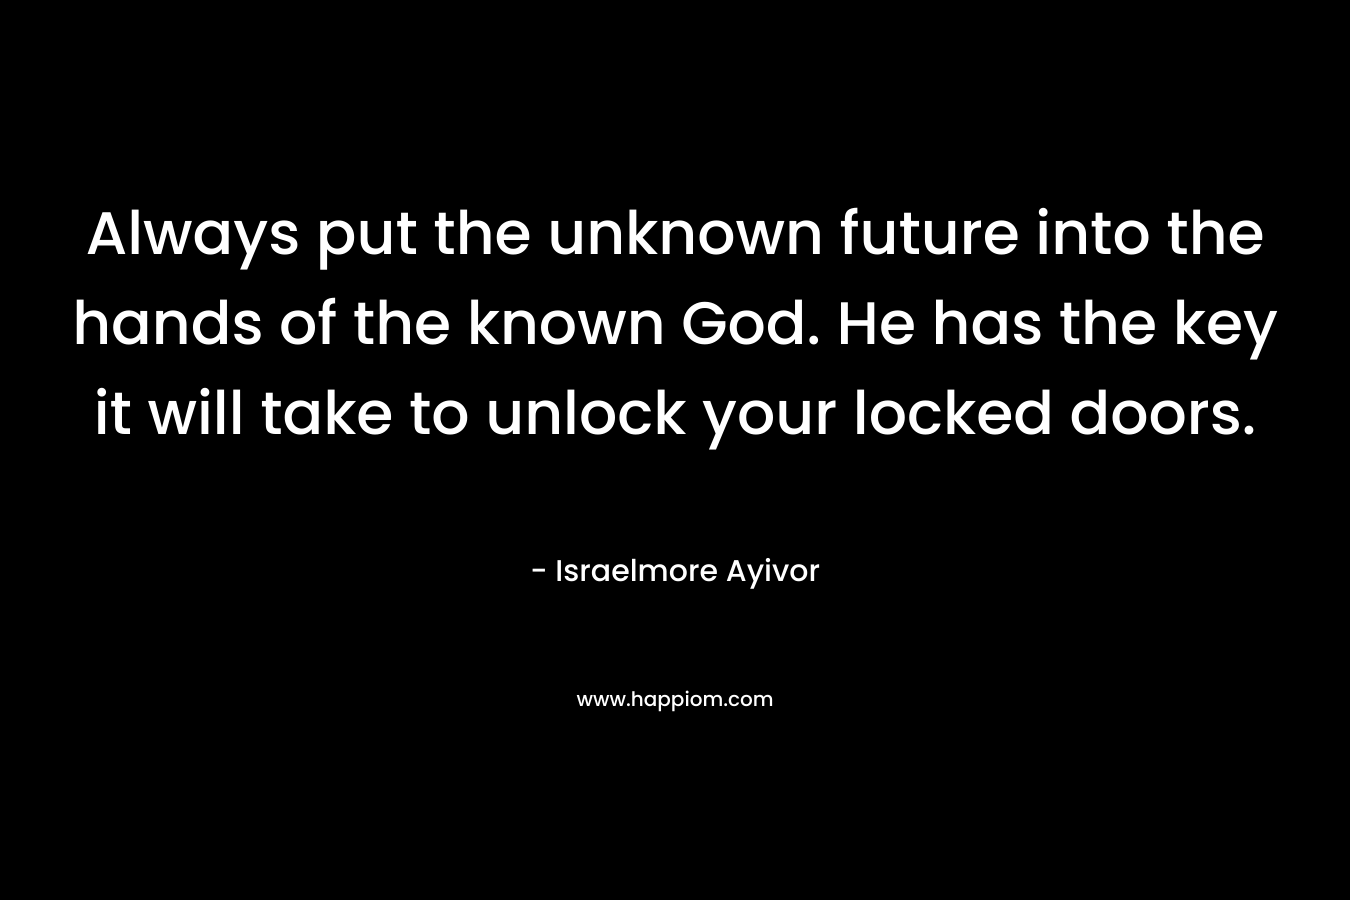 Always put the unknown future into the hands of the known God. He has the key it will take to unlock your locked doors.